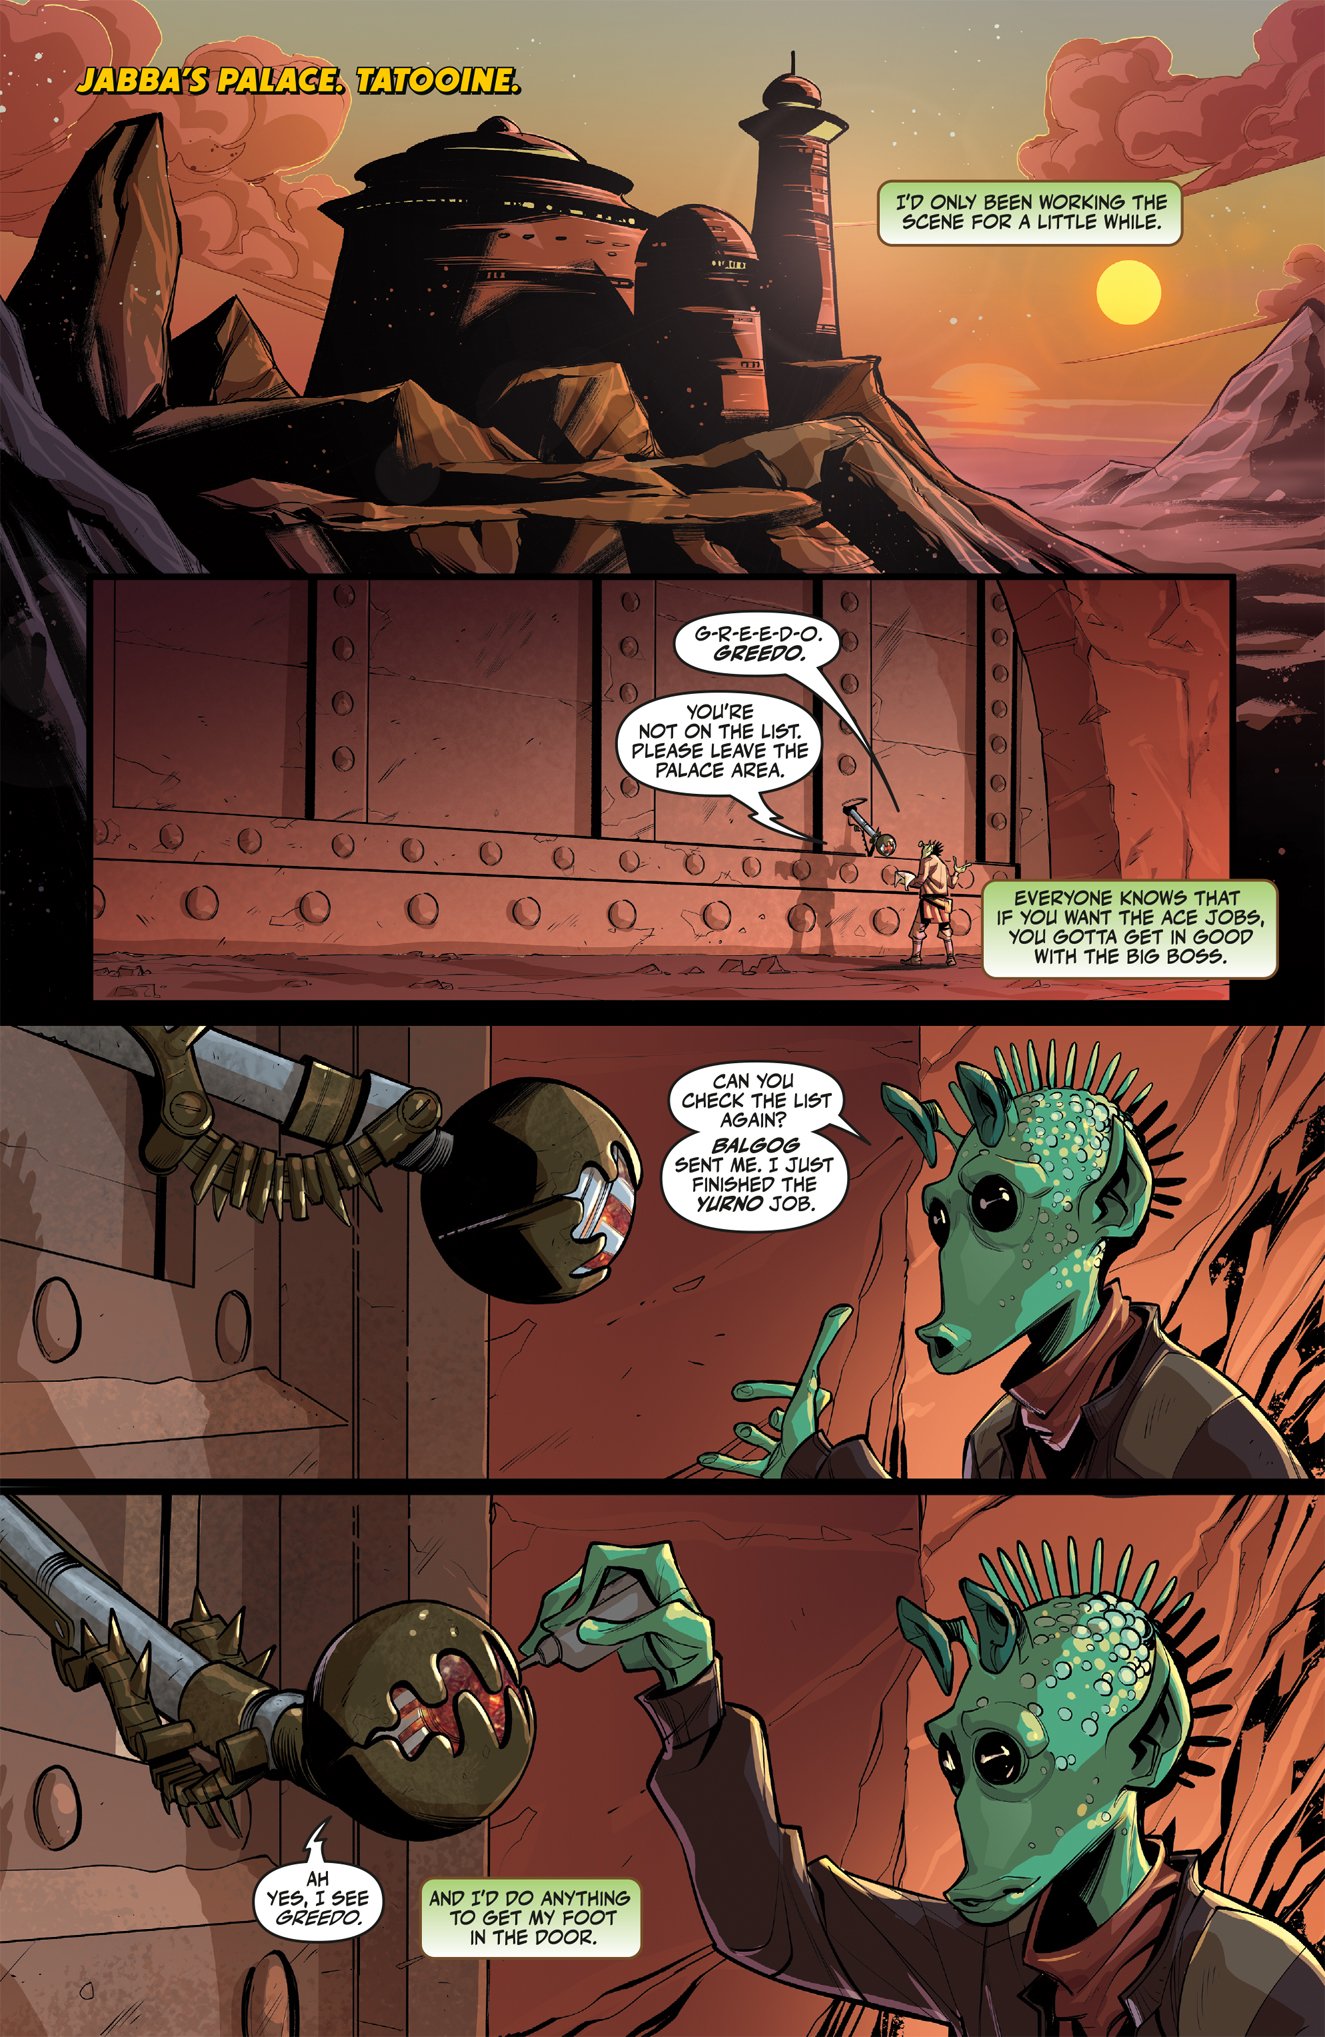 Hyperspace Stories Issue 6 Page 1 - Greedo arrives at Jabba's Palace